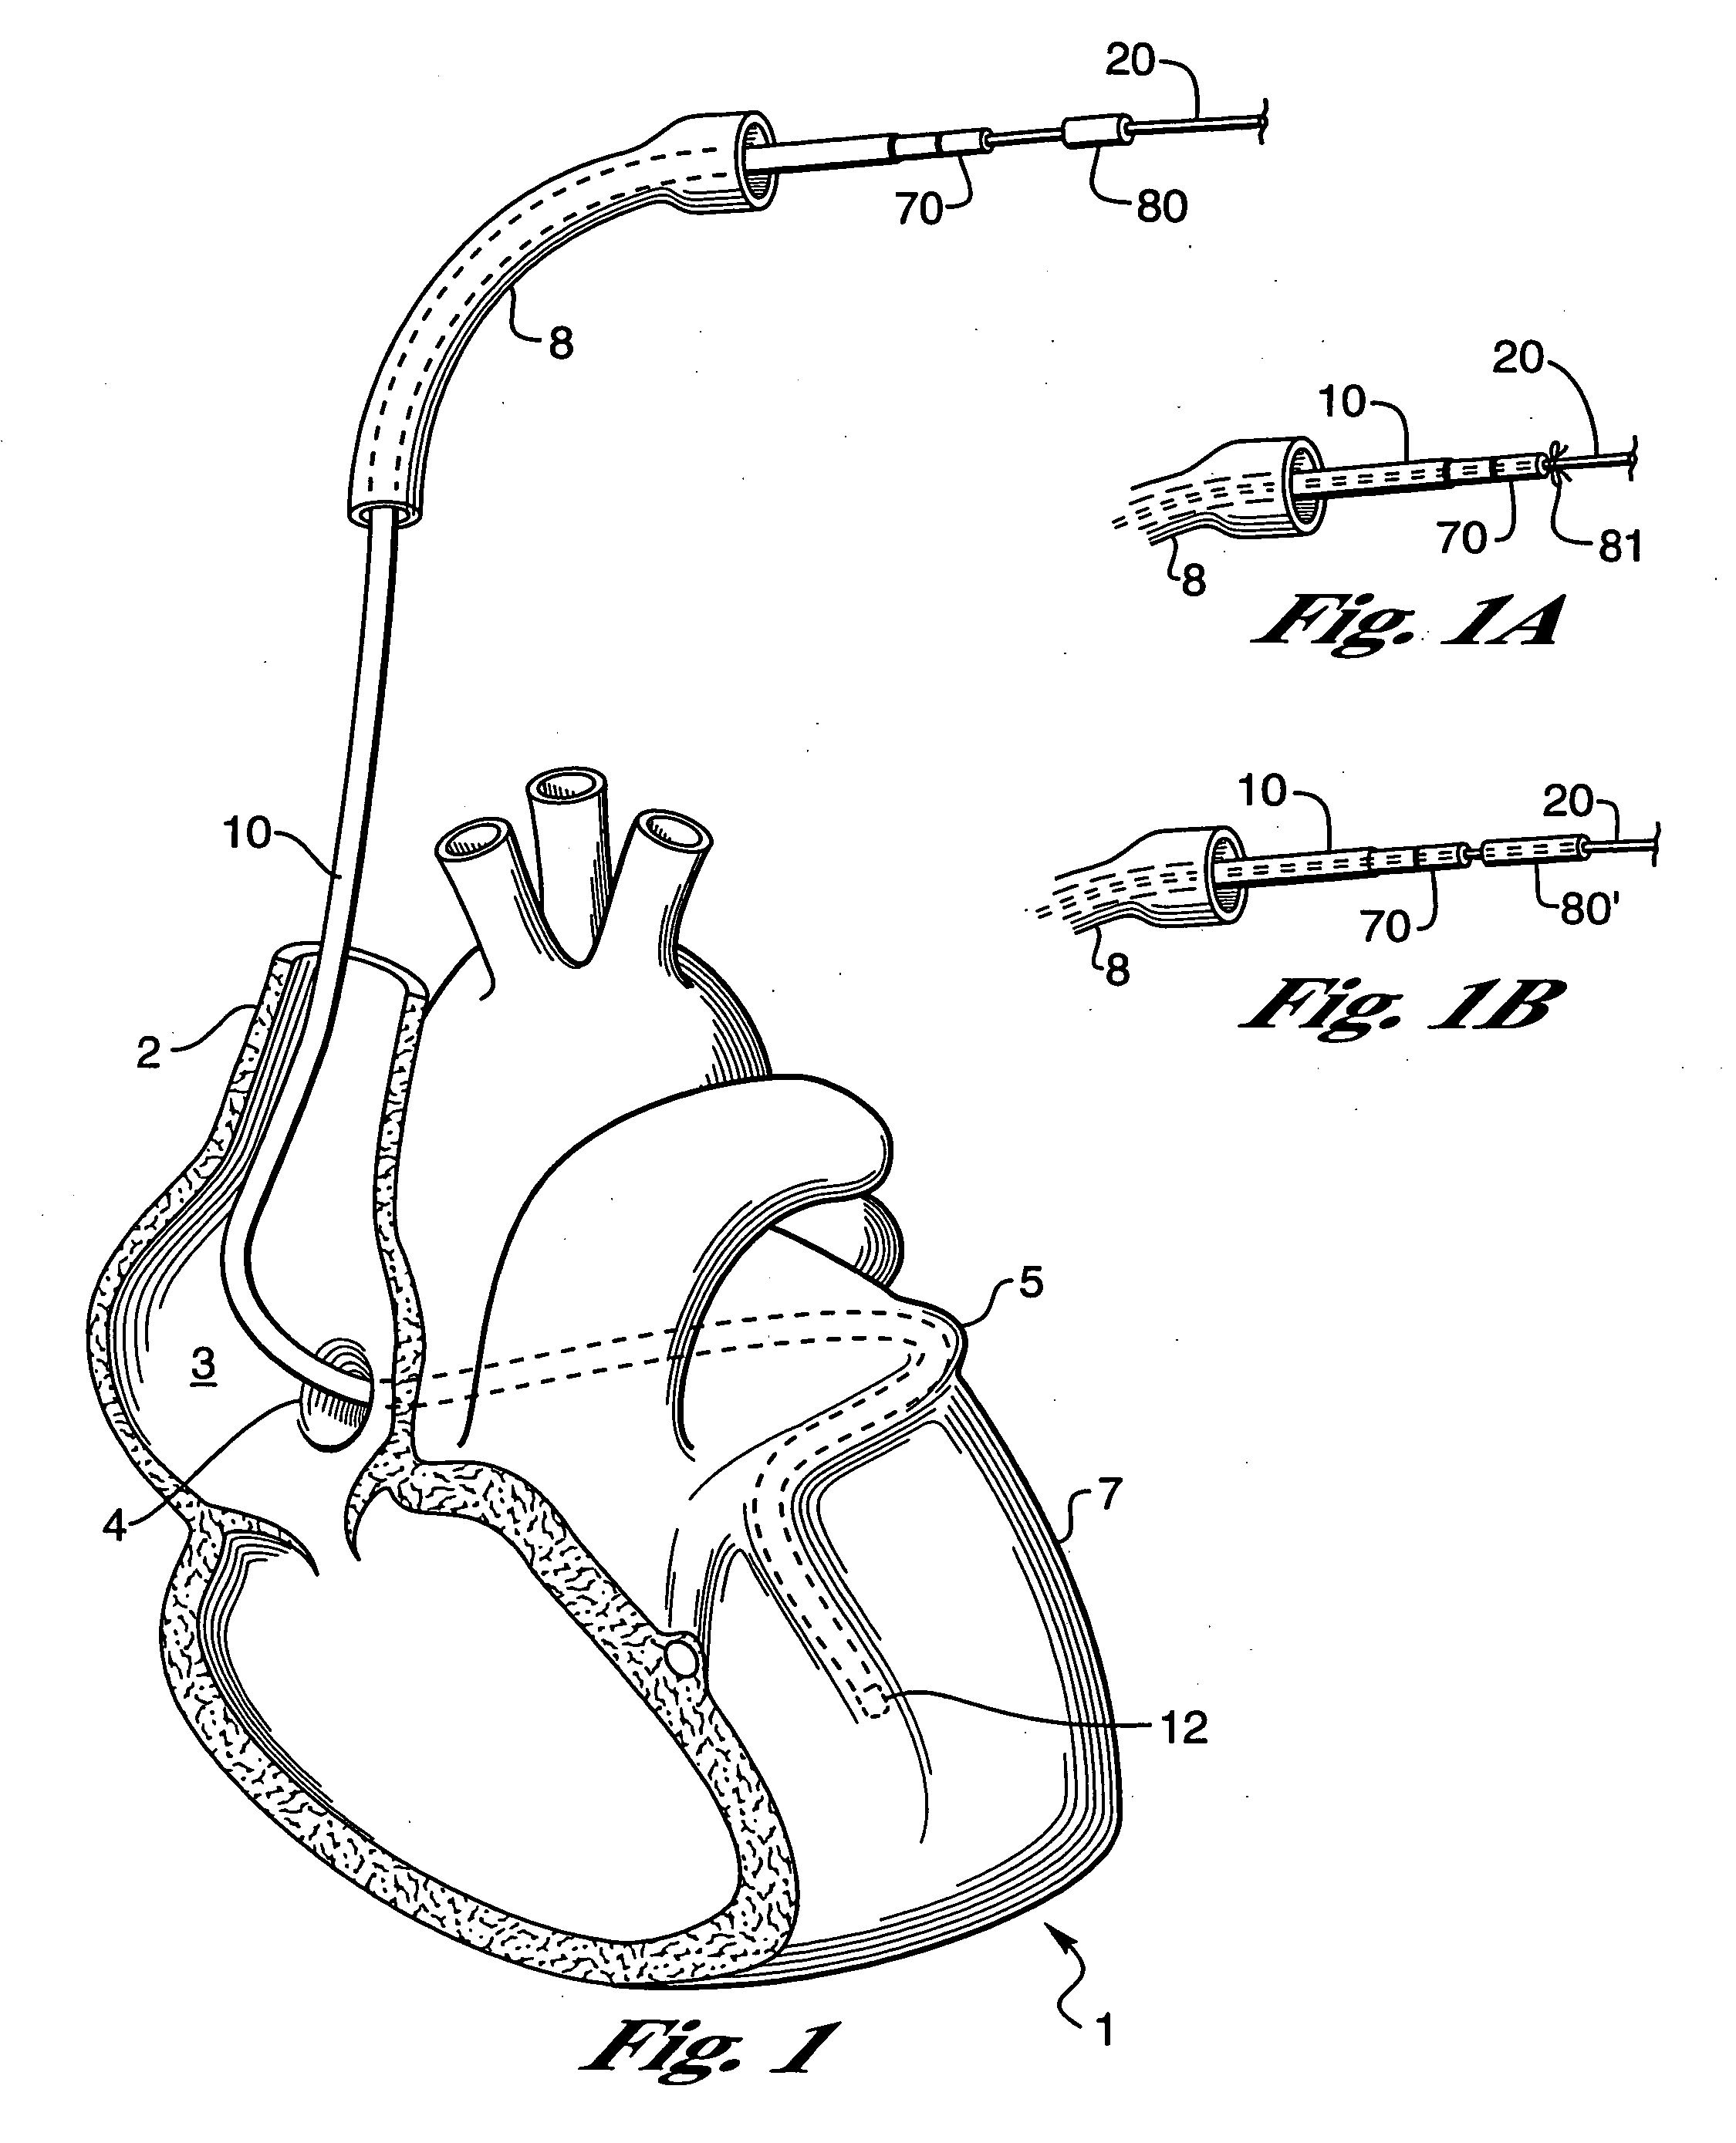 Modified guidewire for left ventricular access lead